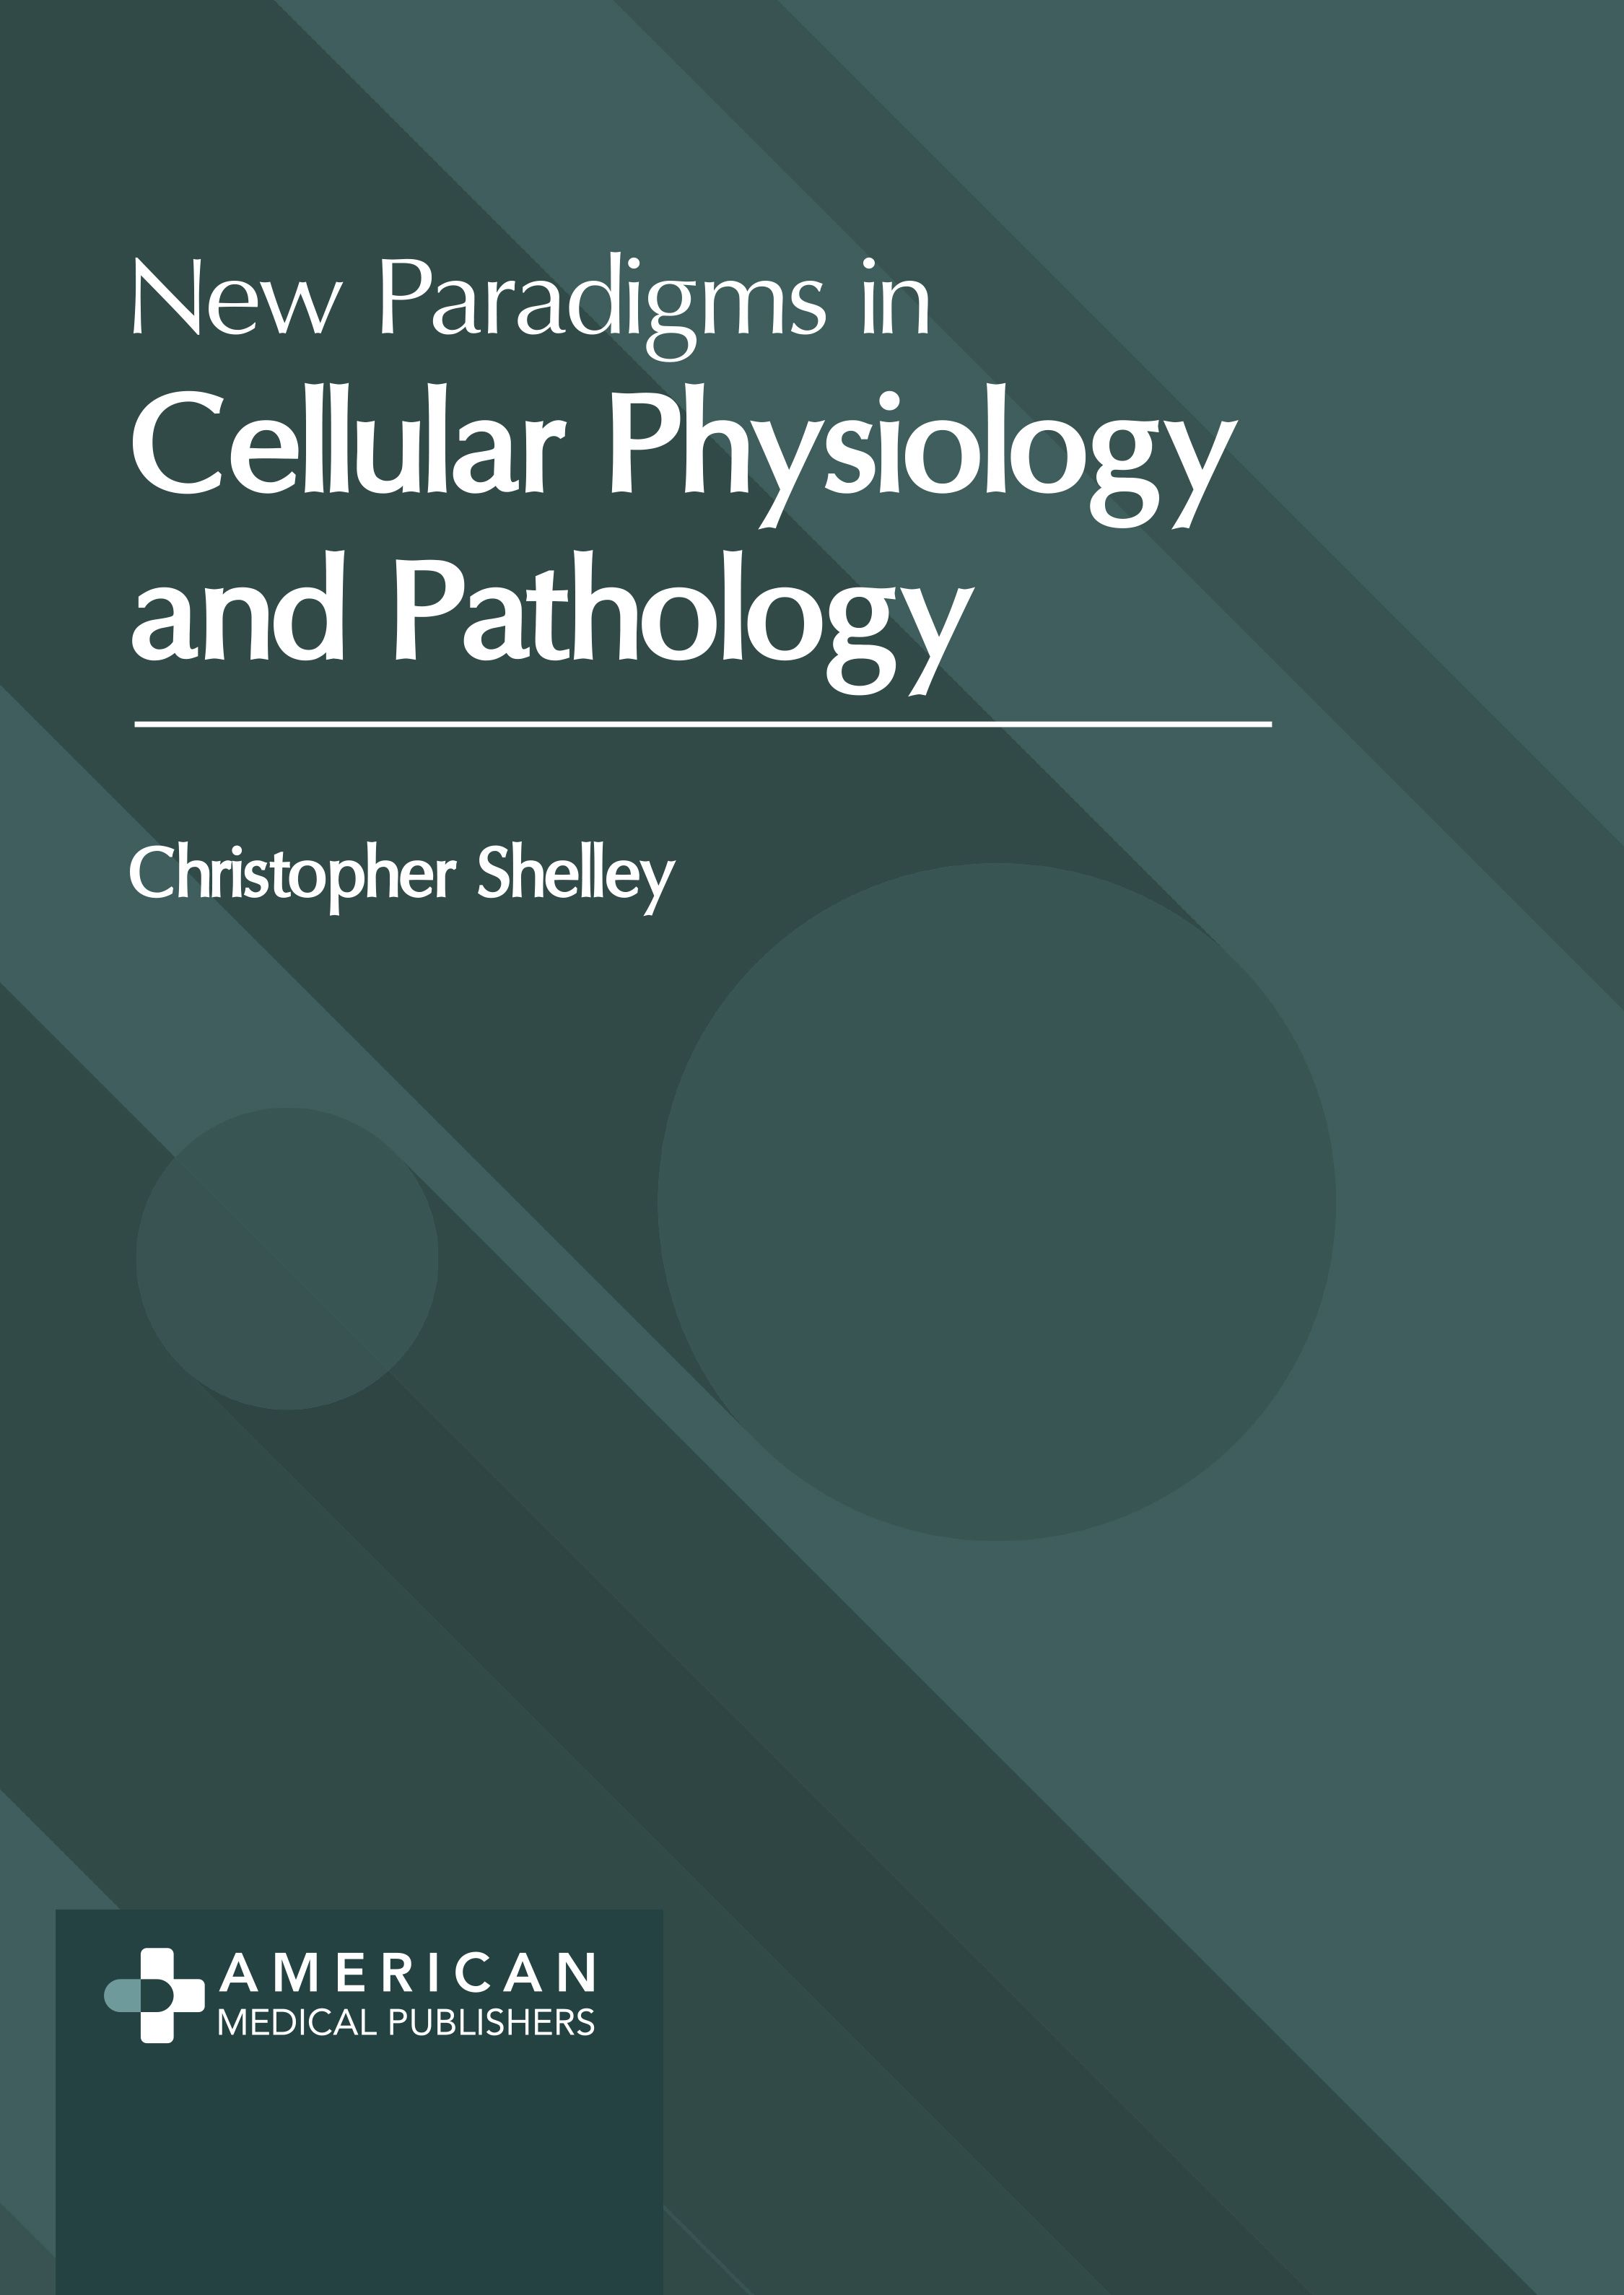 NEW PARADIGMS IN CELLULAR PHYSIOLOGY AND PATHOLOGY